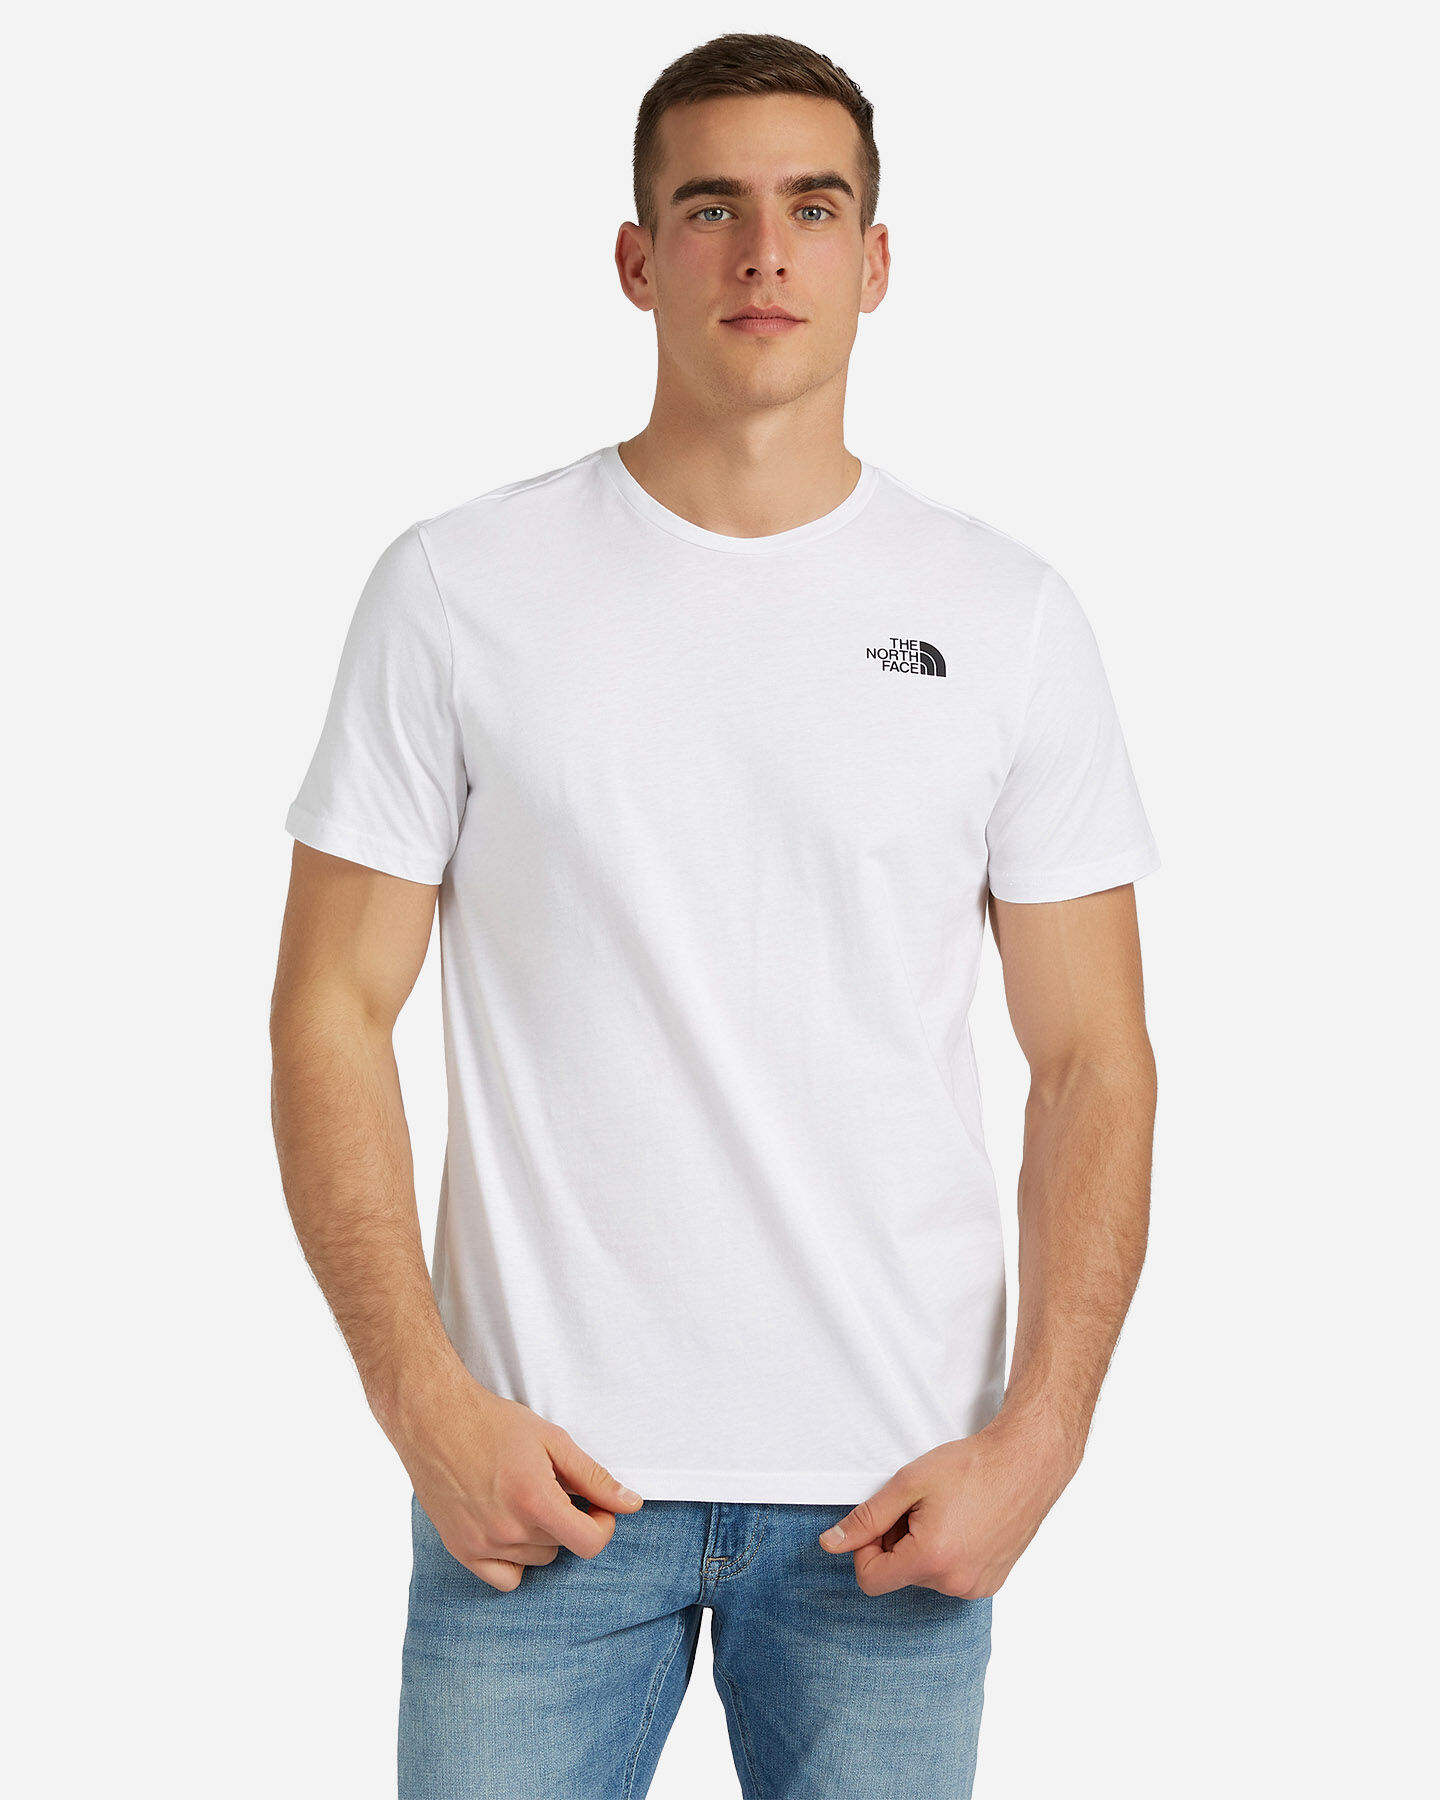  T-Shirt THE NORTH FACE BERARD M S5181620|FN4|S scatto 0